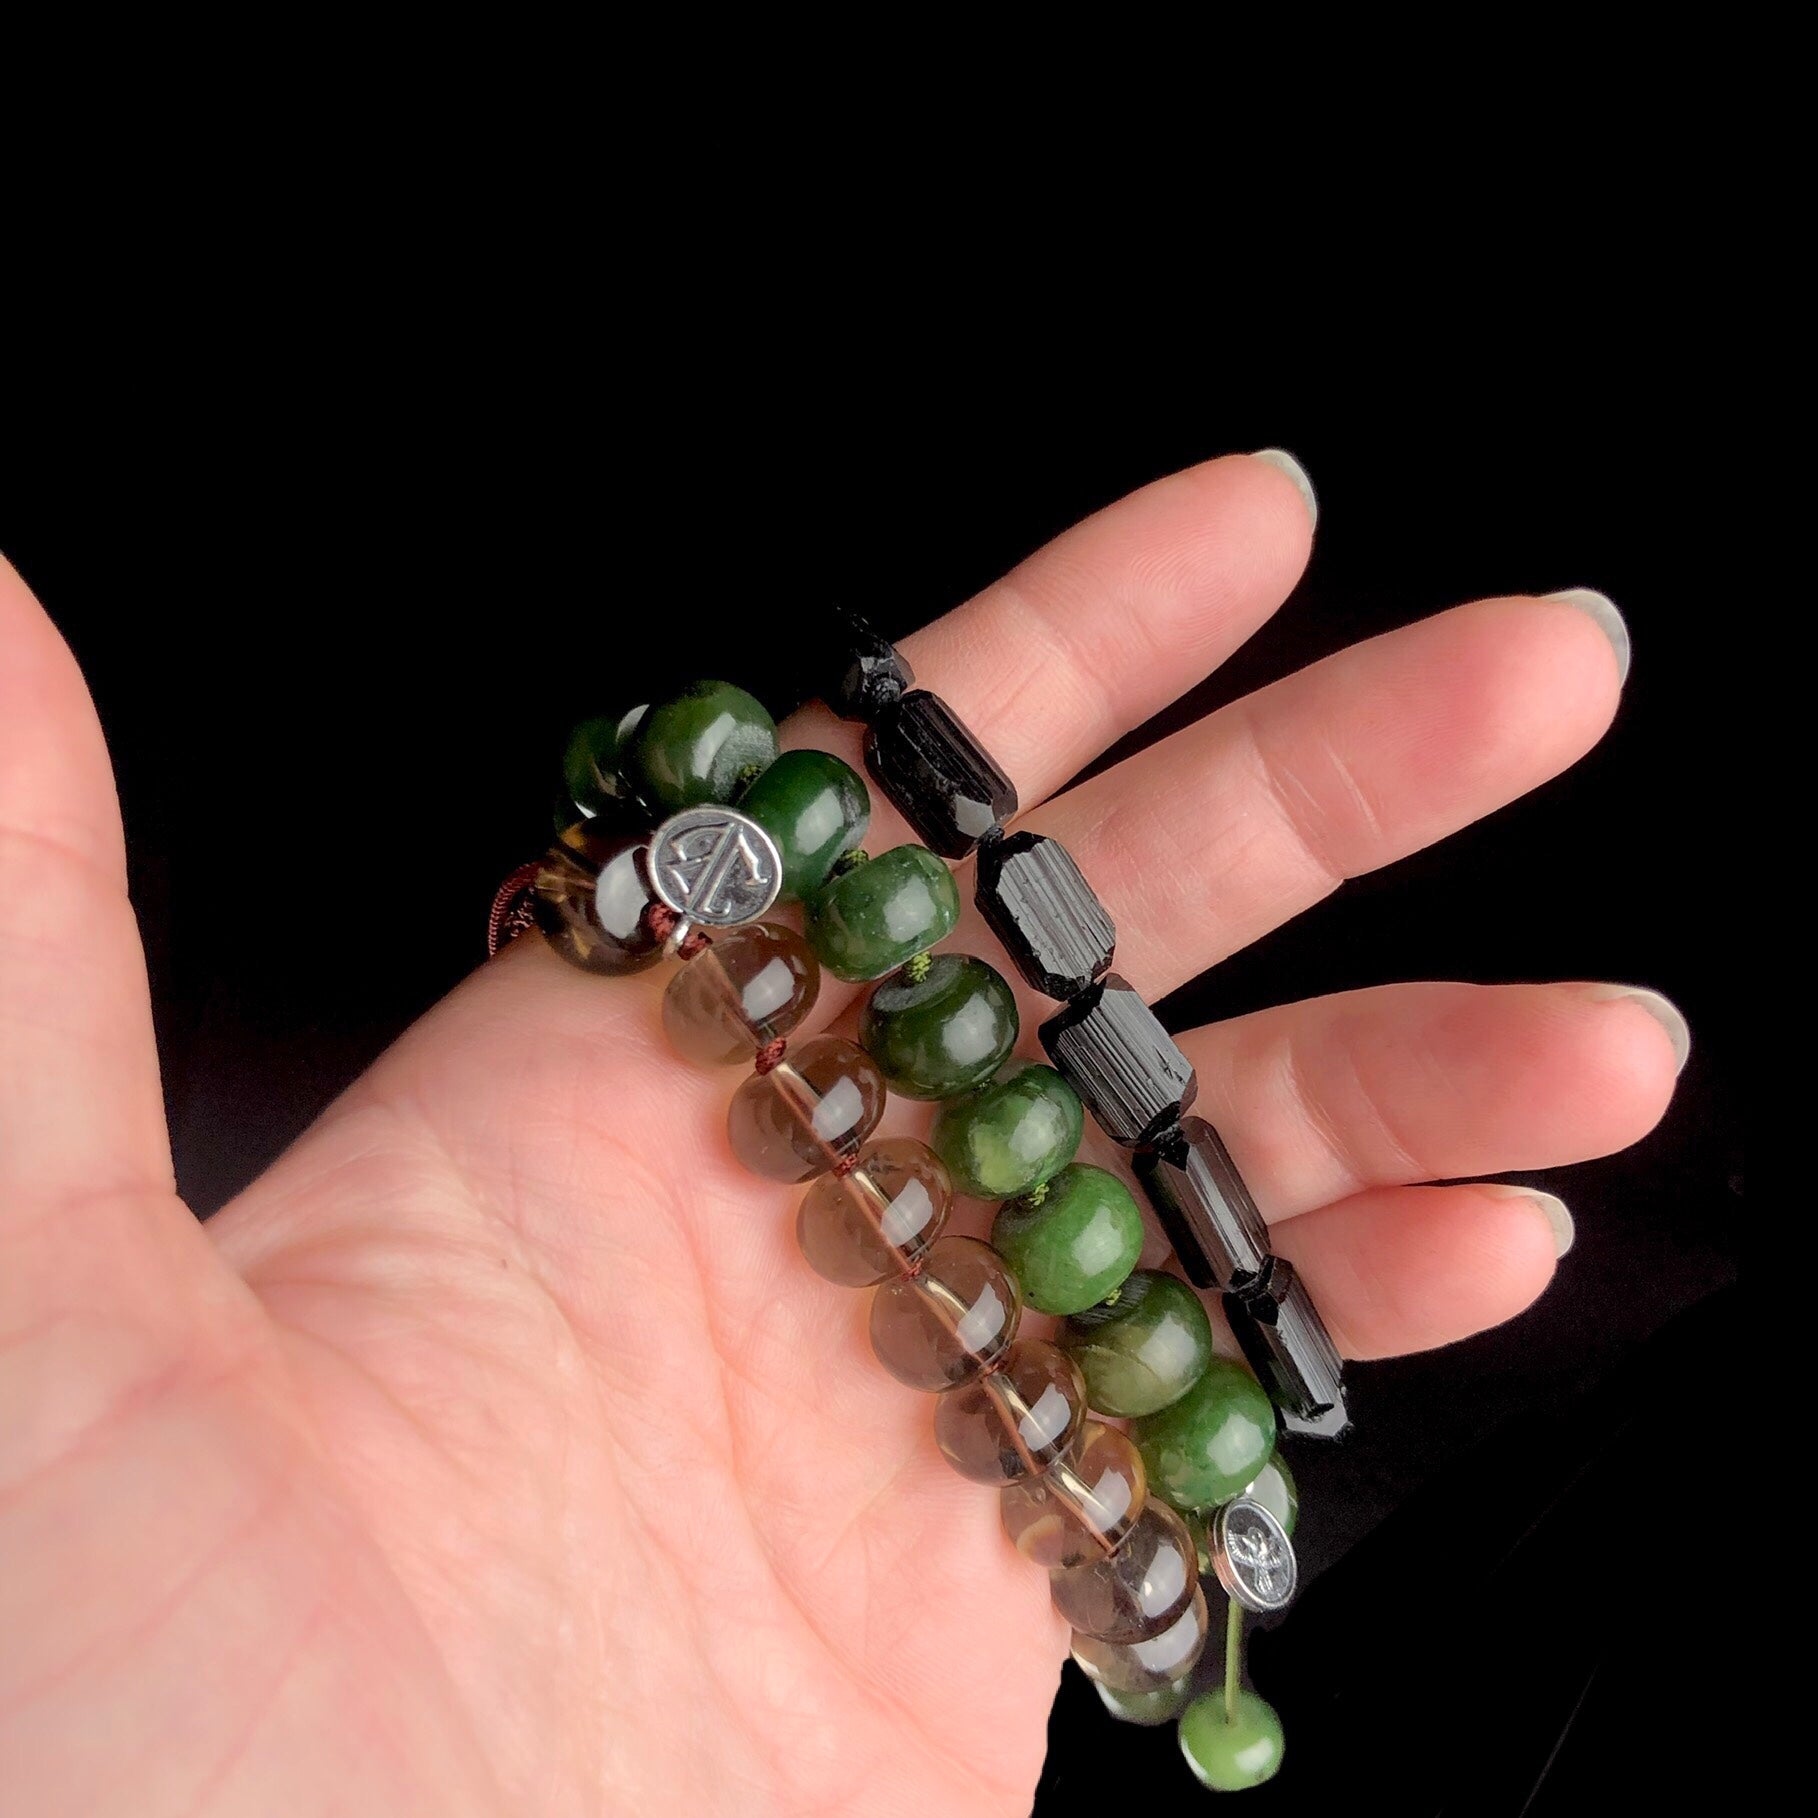 Translucent grey, opaque forest green and dark black beaded bracelets shown in hand